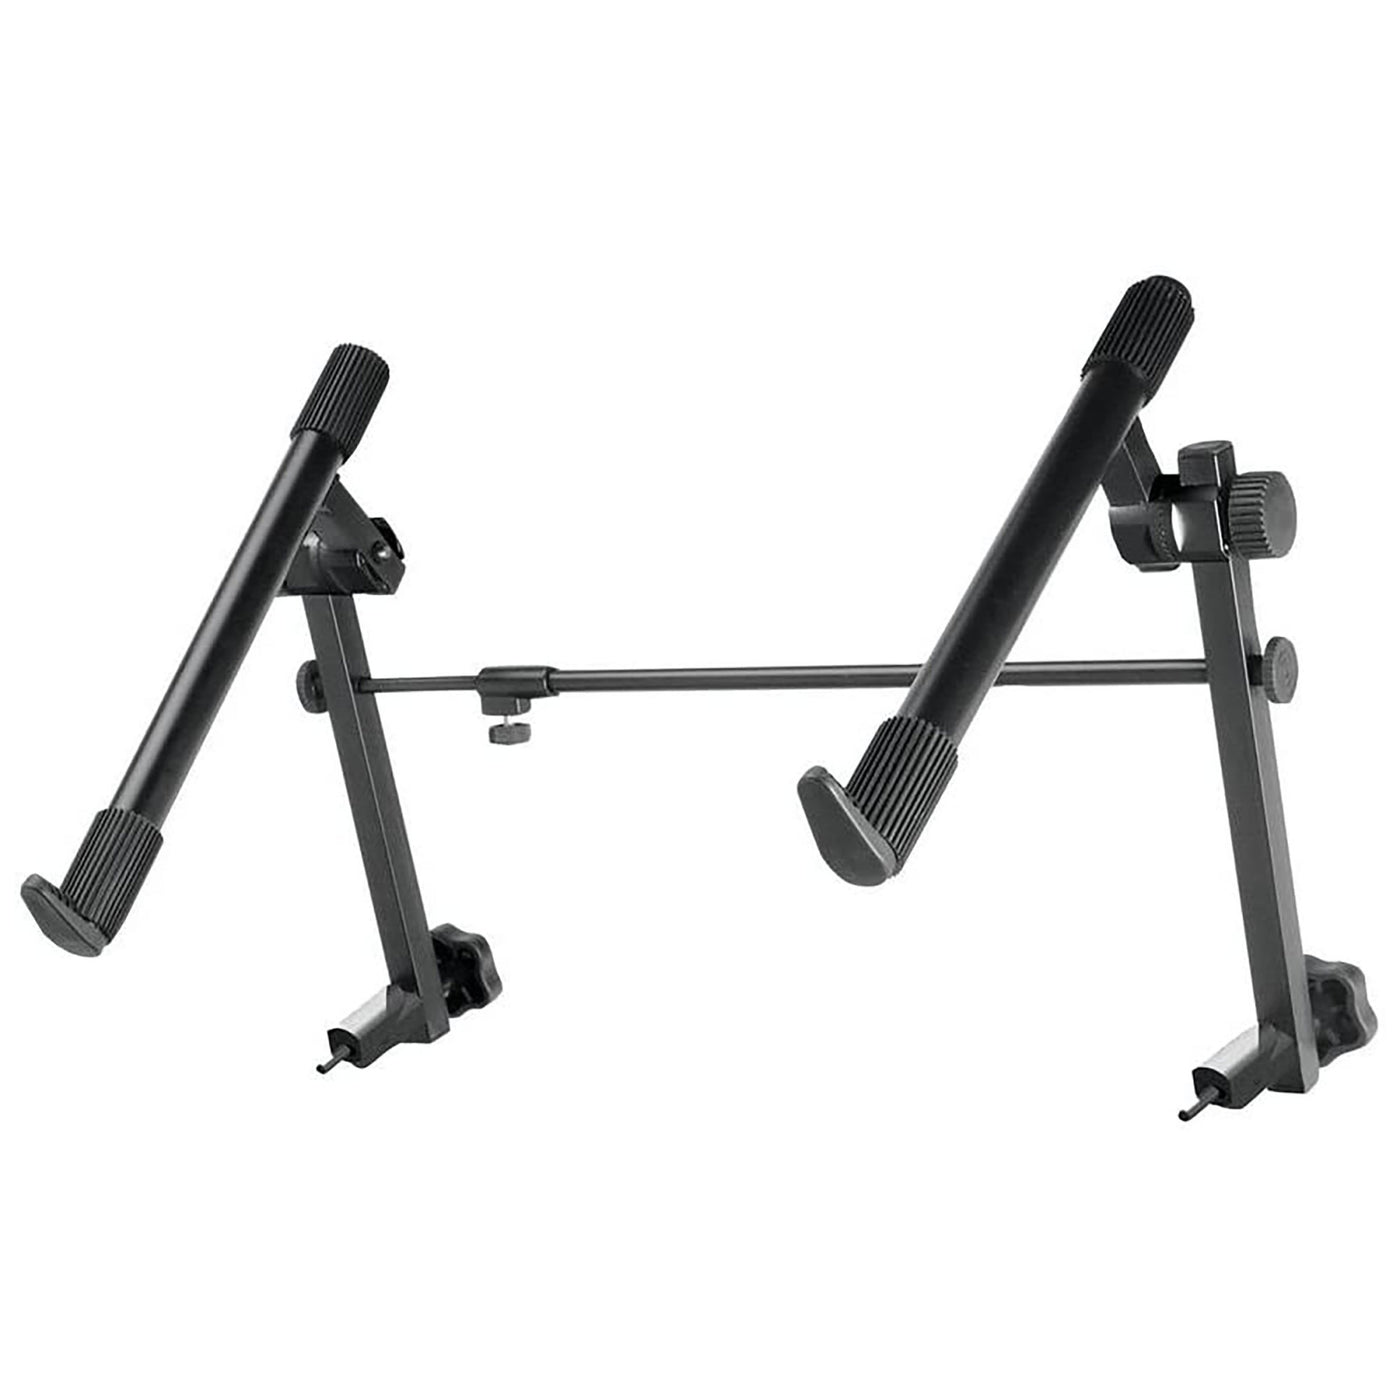 On-Stage Stands KSA7500 Universal 2nd Tier for X-Style Keyboard Stands